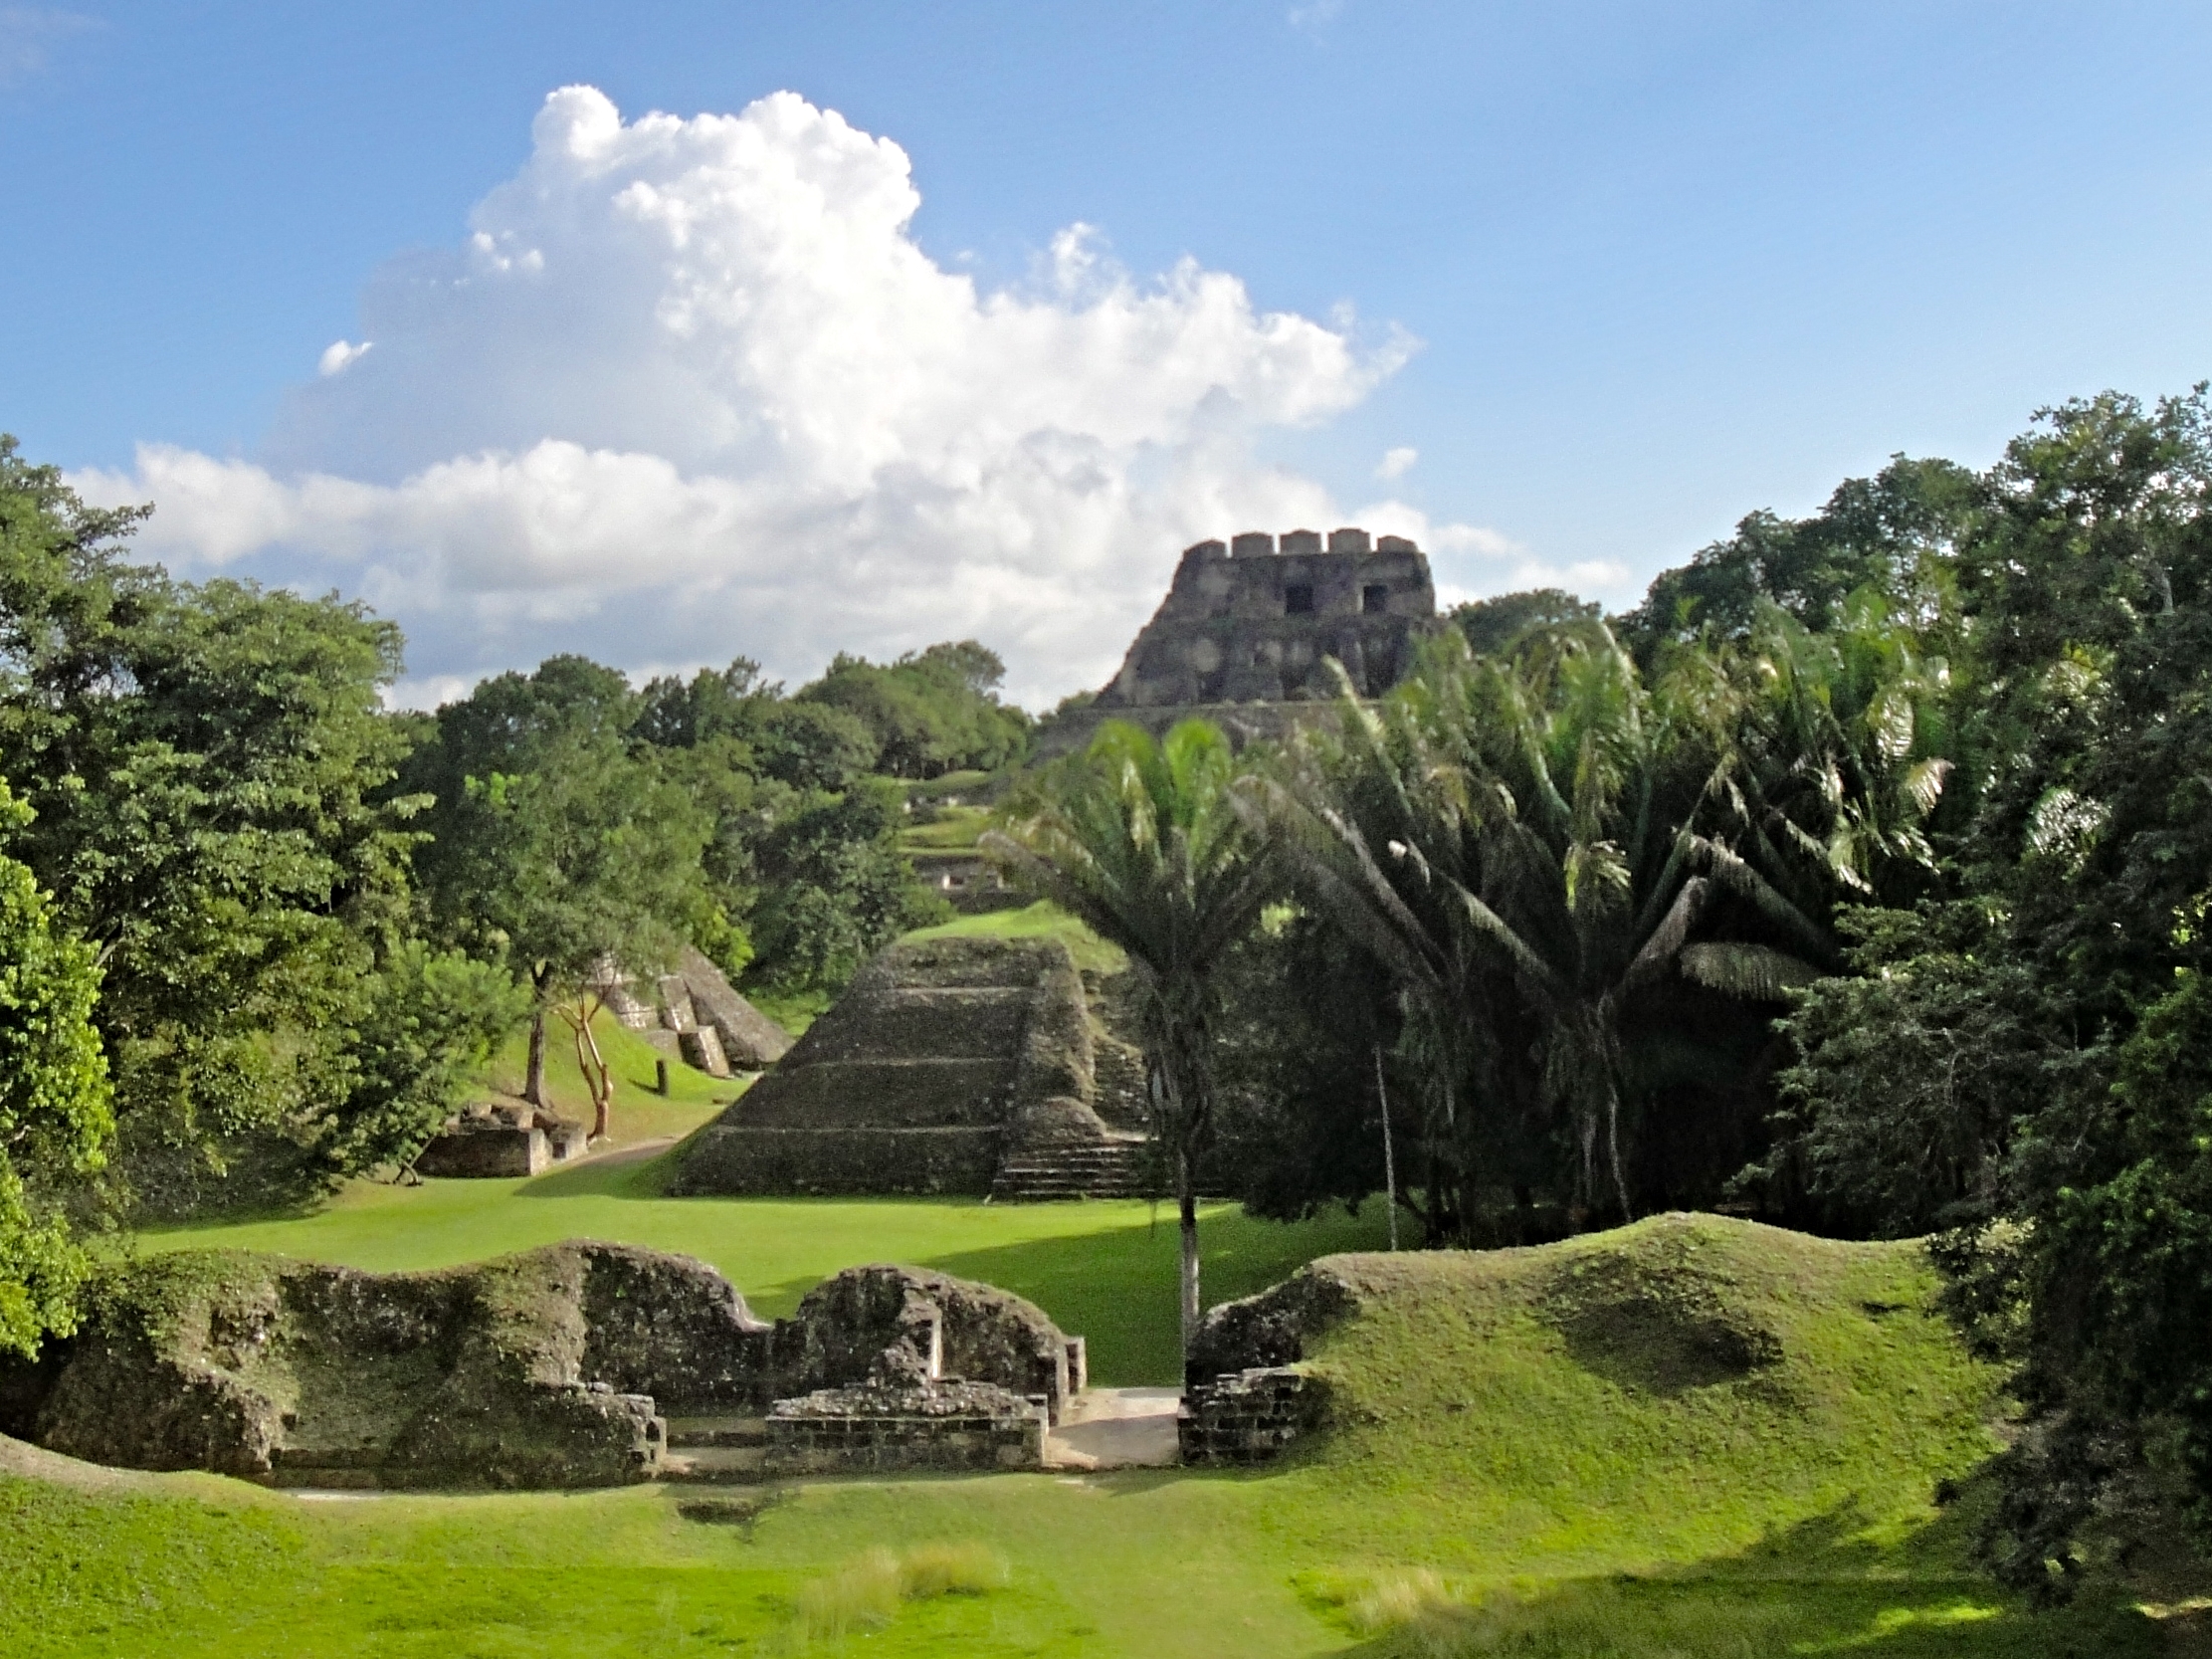 Xunantunich is one of Belize's loveliest and most accessible Maya Sites